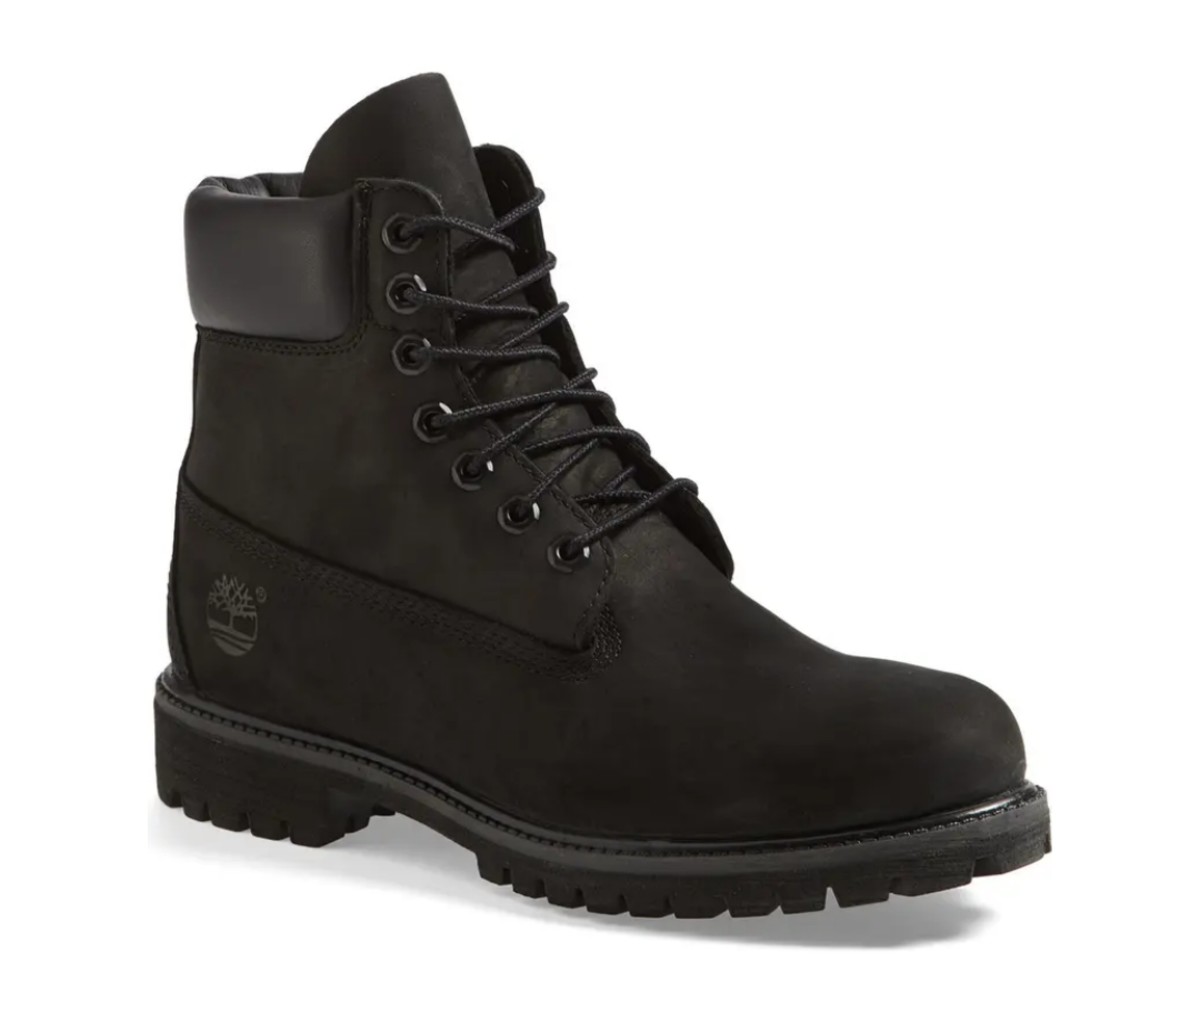 Men's Boots Guide: Our Favorite Pairs for 2022 | Men's Journal - Men's ...